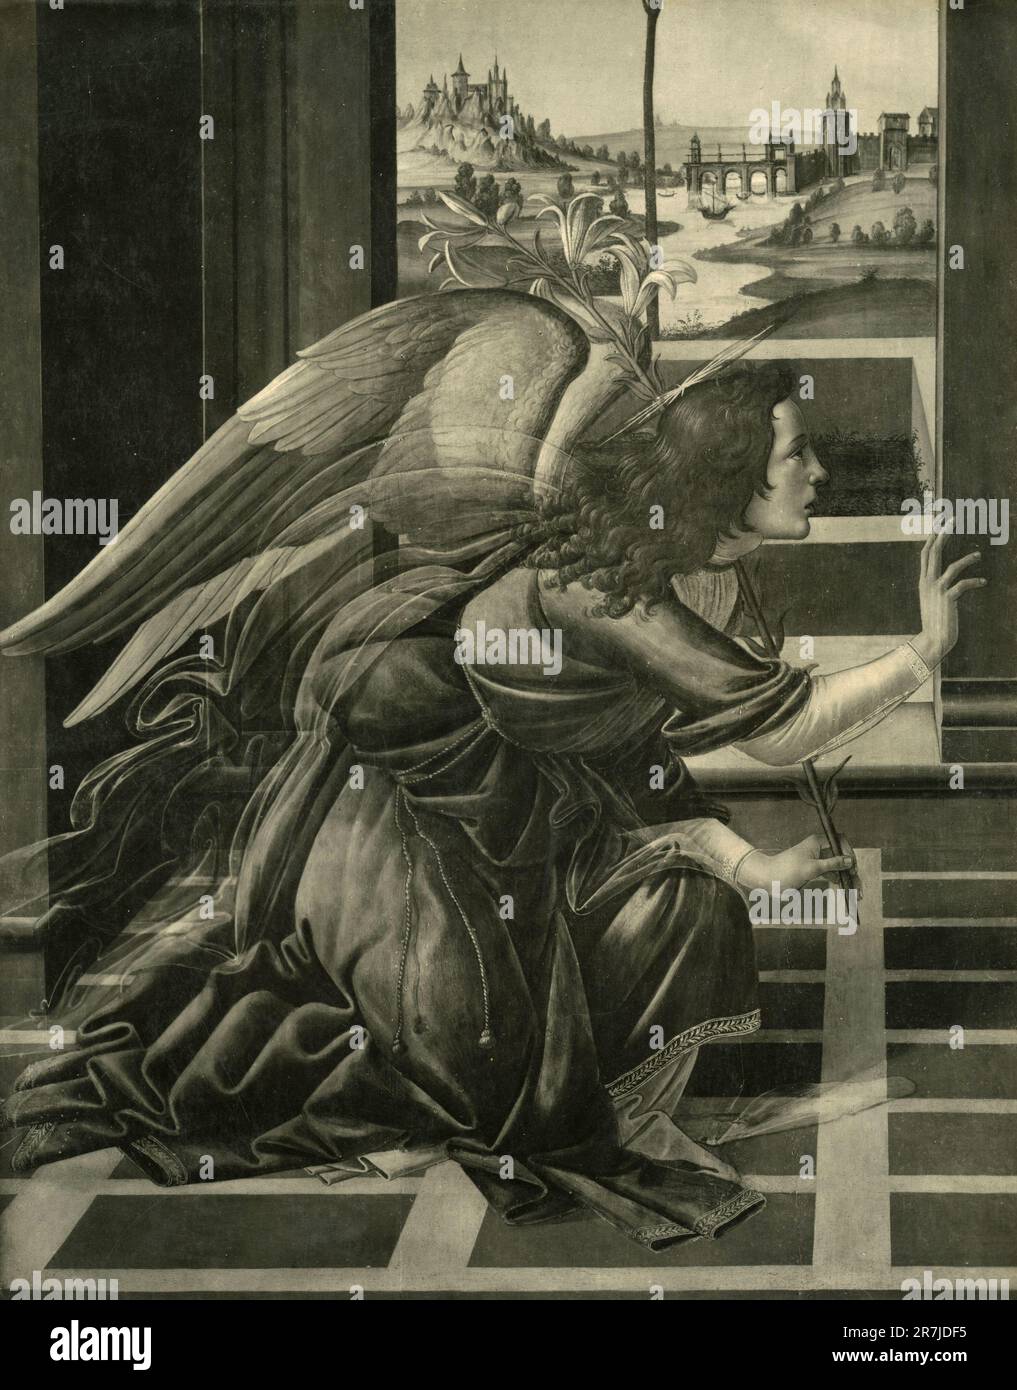 Detail of the Angel in the Annunciation, painting by Italian artist Botticelli, Uffizi Gallery, Florence, Italy 1900s Stock Photo